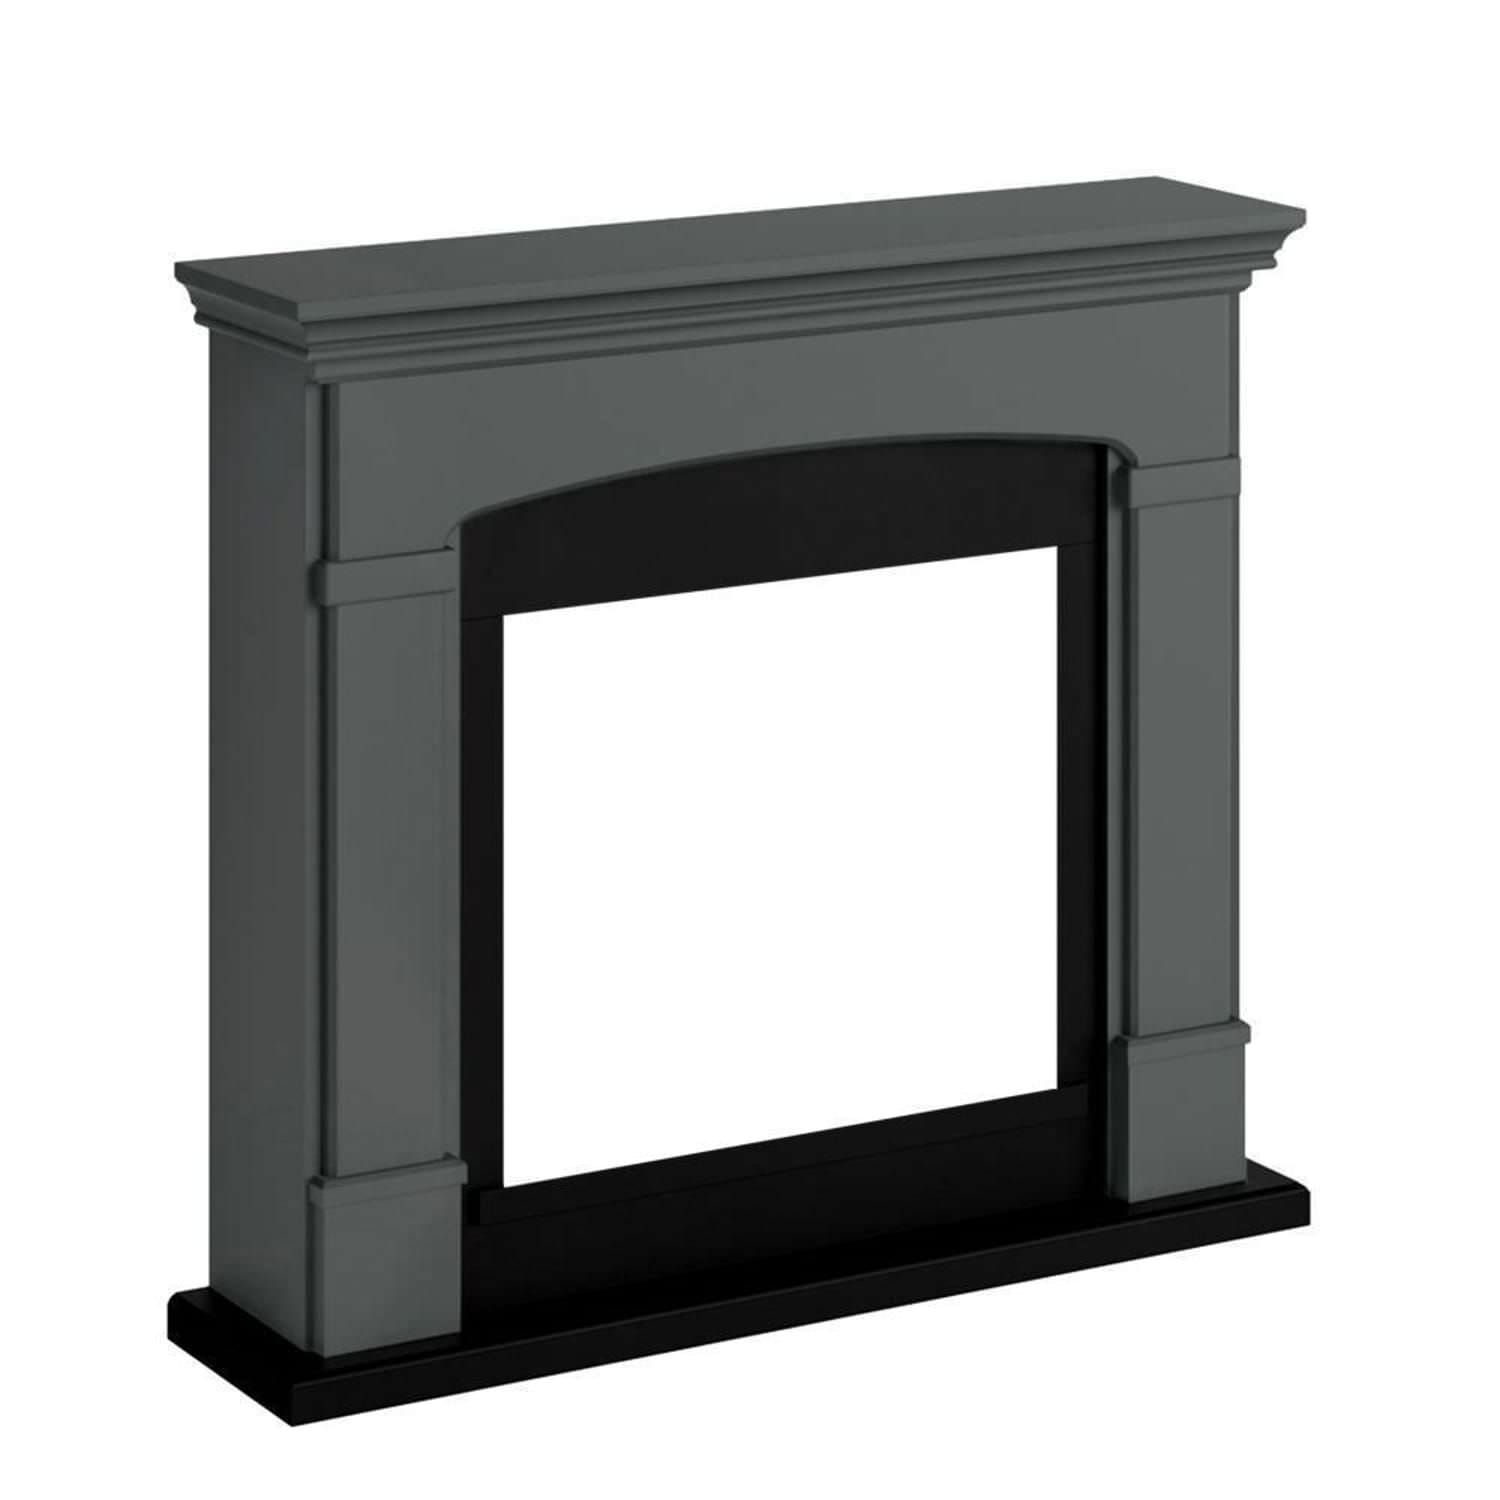 Wooden frame for electric fireplace